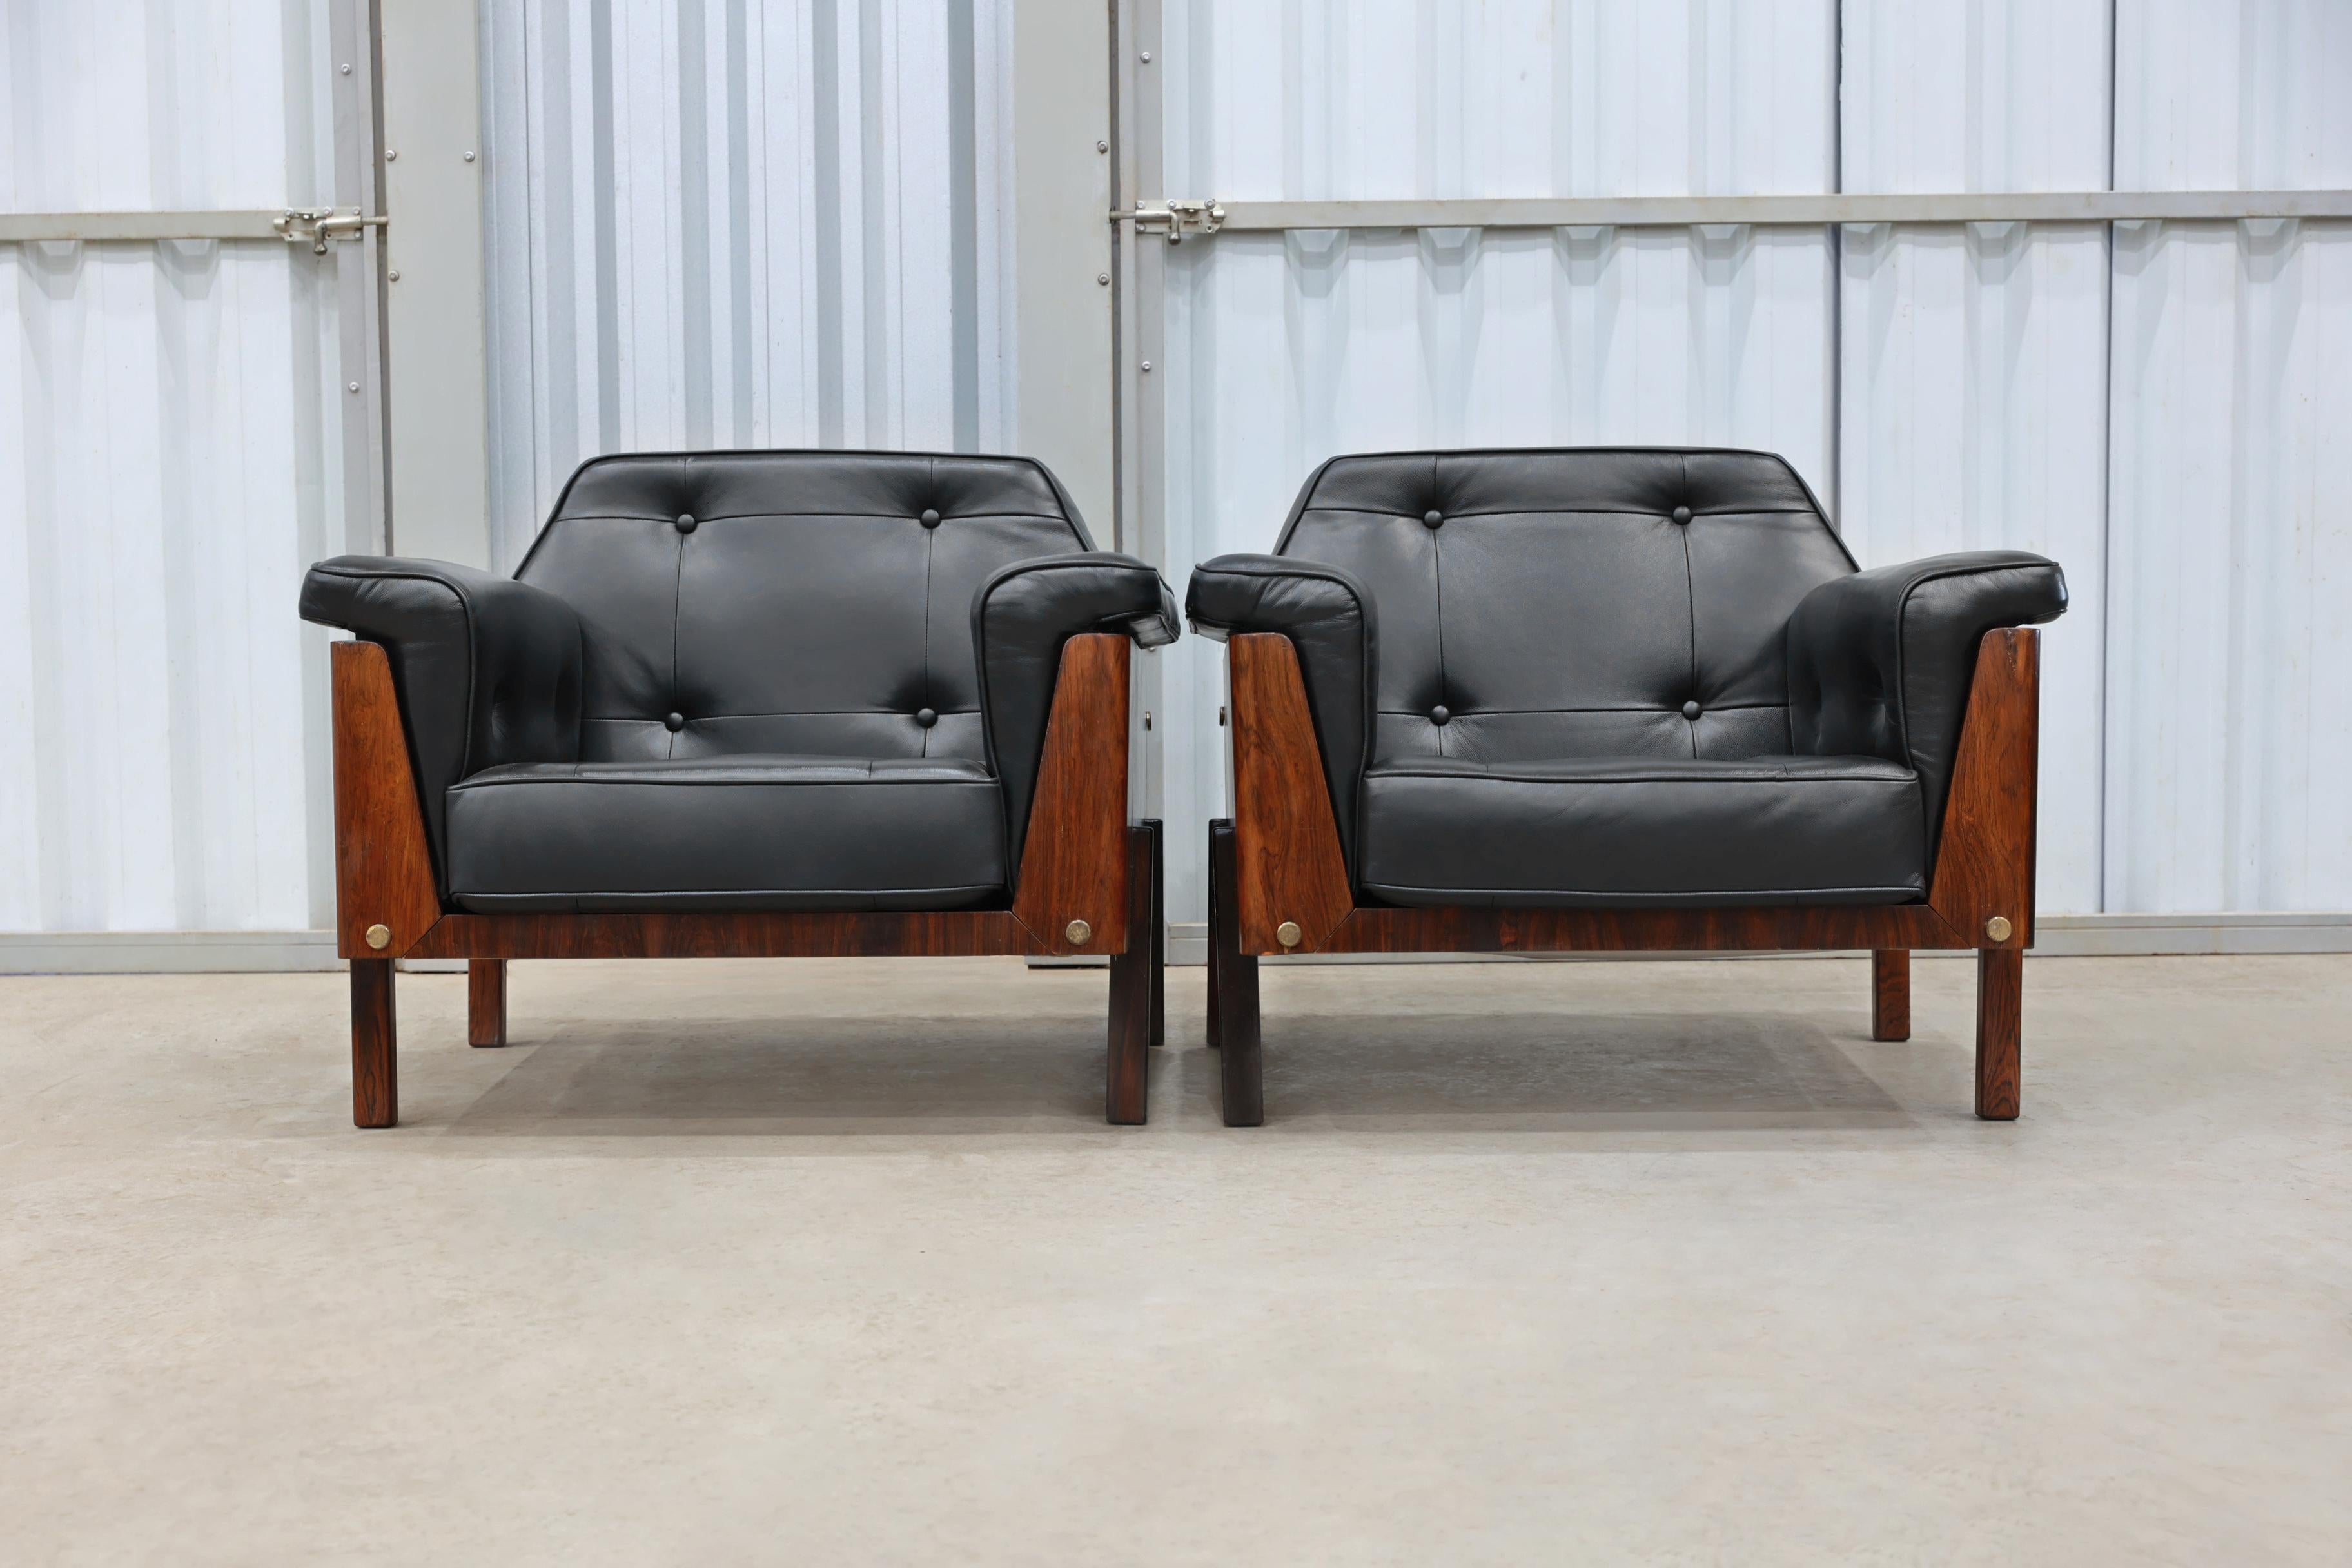 These unique looking armchairs feature a square base made in Brazilian rosewood (Jacaranda). They have been upholstered in black leather and the back seat has been tufted with four buttons. The structure of the backseat has an incredible design